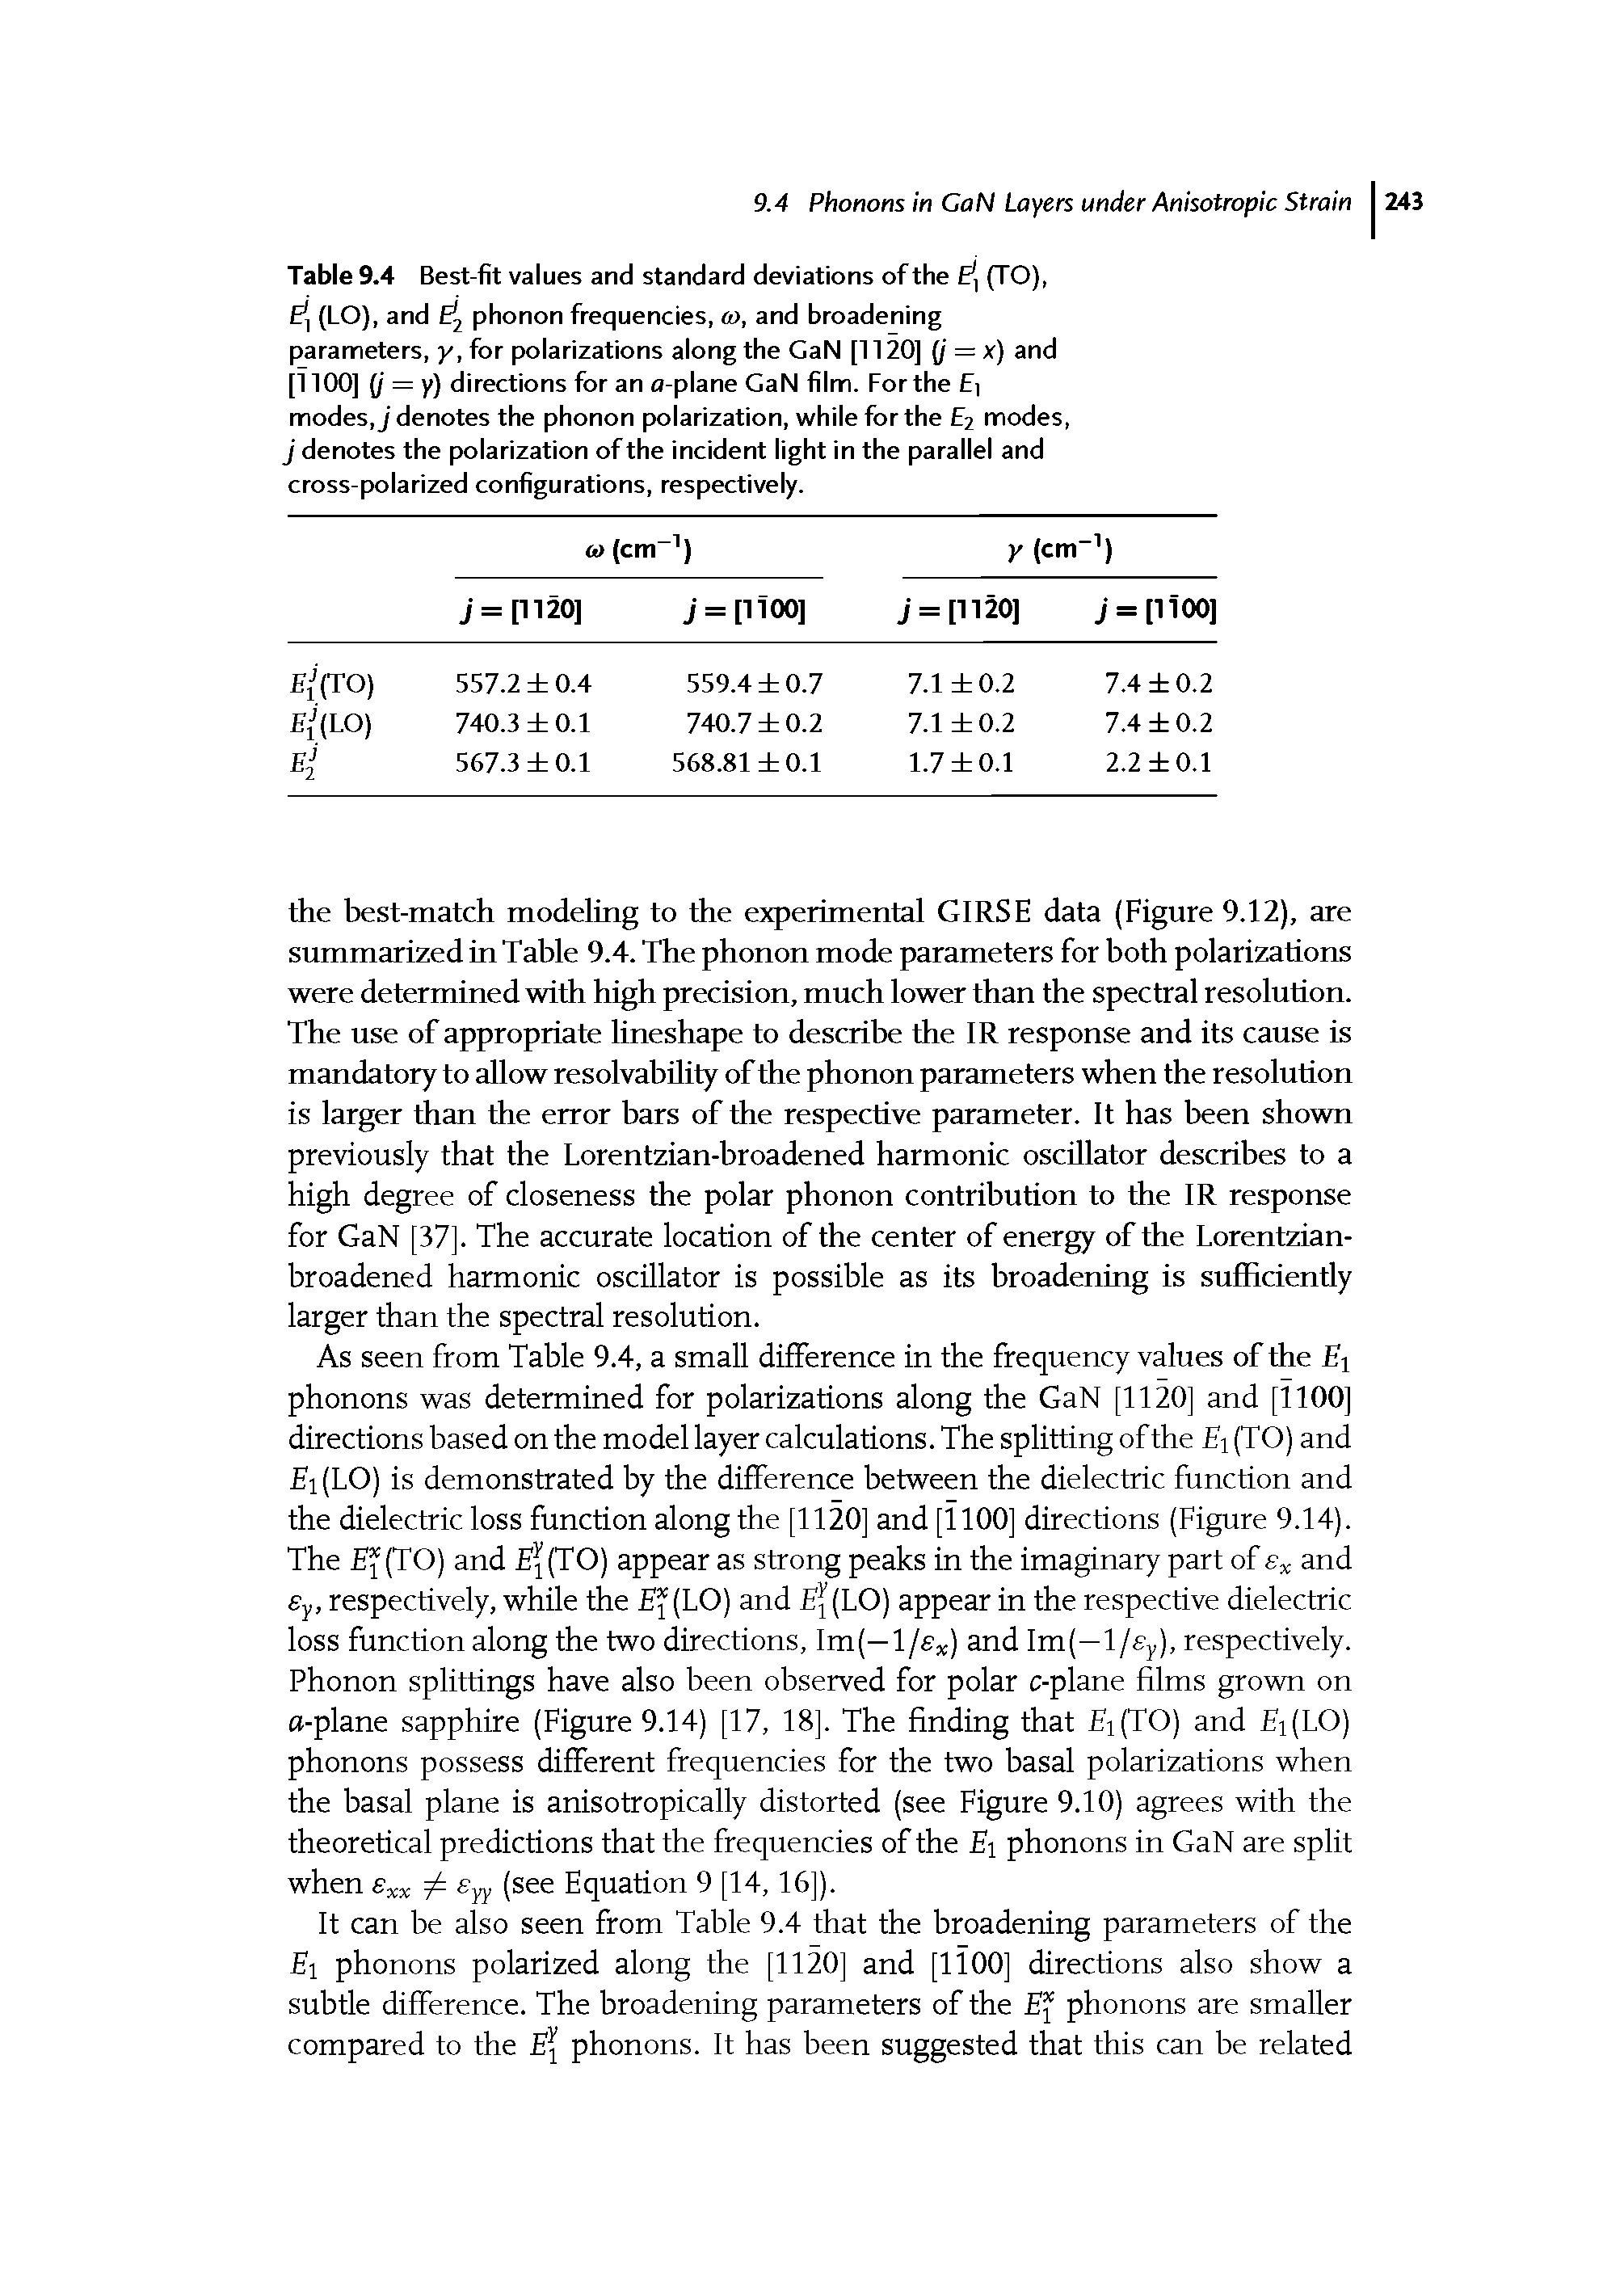 Table 9.4 Best-fit values and standard deviations of the , (TO), (LO), and phonon frequencies, to, and broadening parameters, y, for polarizations along the GaN [1120] (/ = x) and [1100] / = y) directions for an o-plane GaN film. Forthe ] modes, j denotes the phonon polarization, while for the 2 modes, j denotes the polarization of the incident light in the parallel and cross-polarized configurations, respectively.